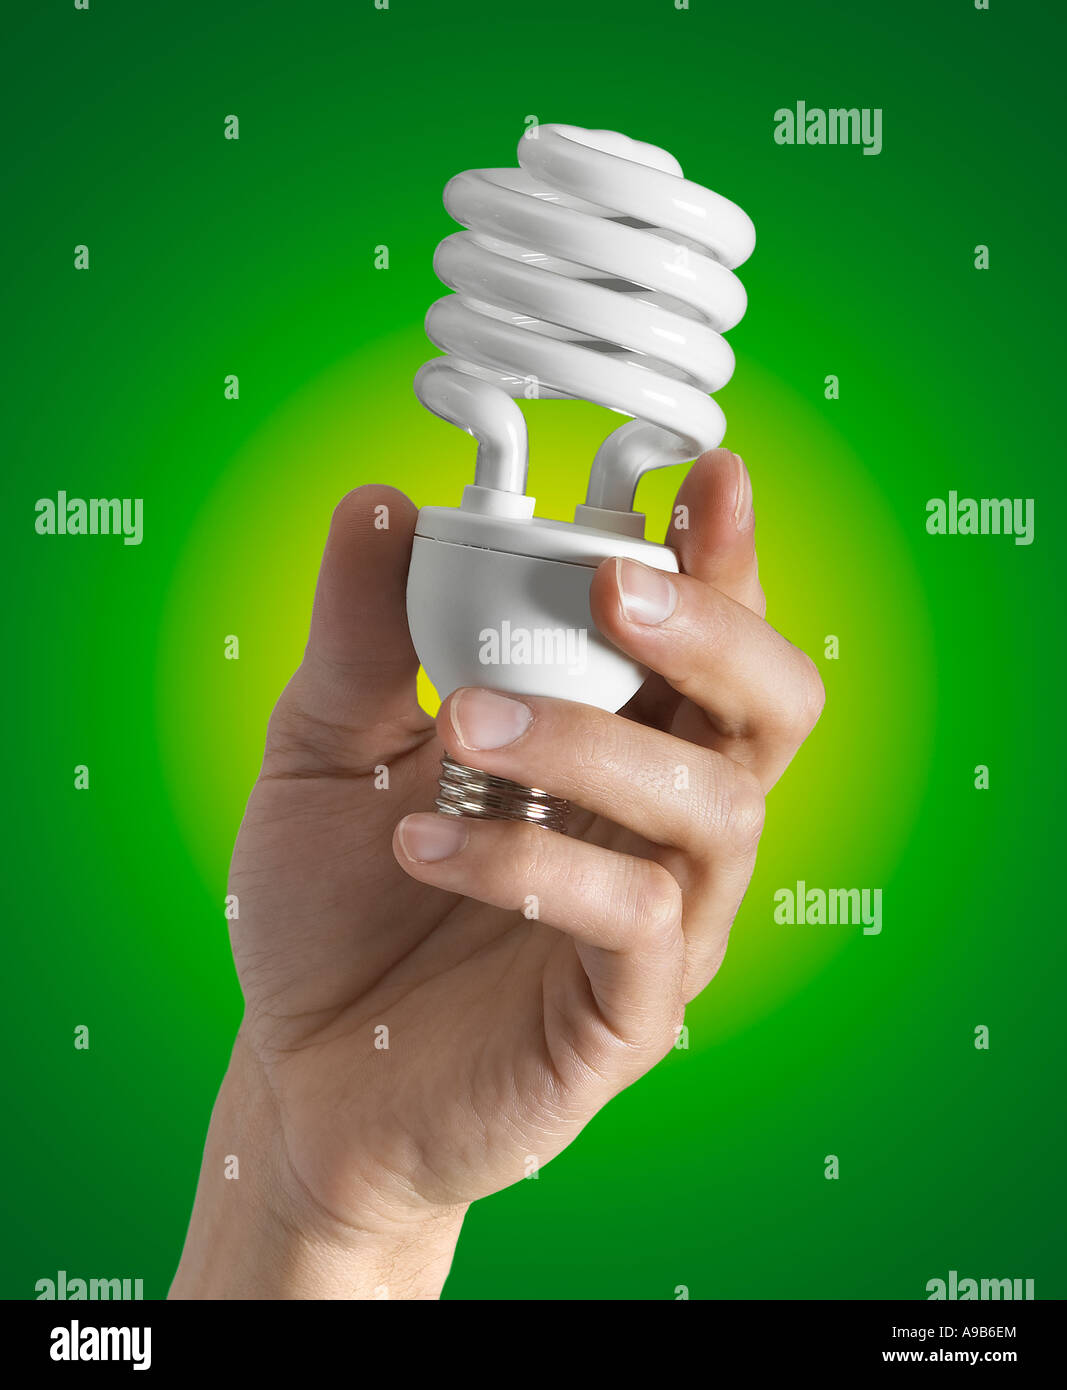 Energy Efficient Compact Fluorescent Light Bulb With Hand 'CFL Bulb' Stock Photo